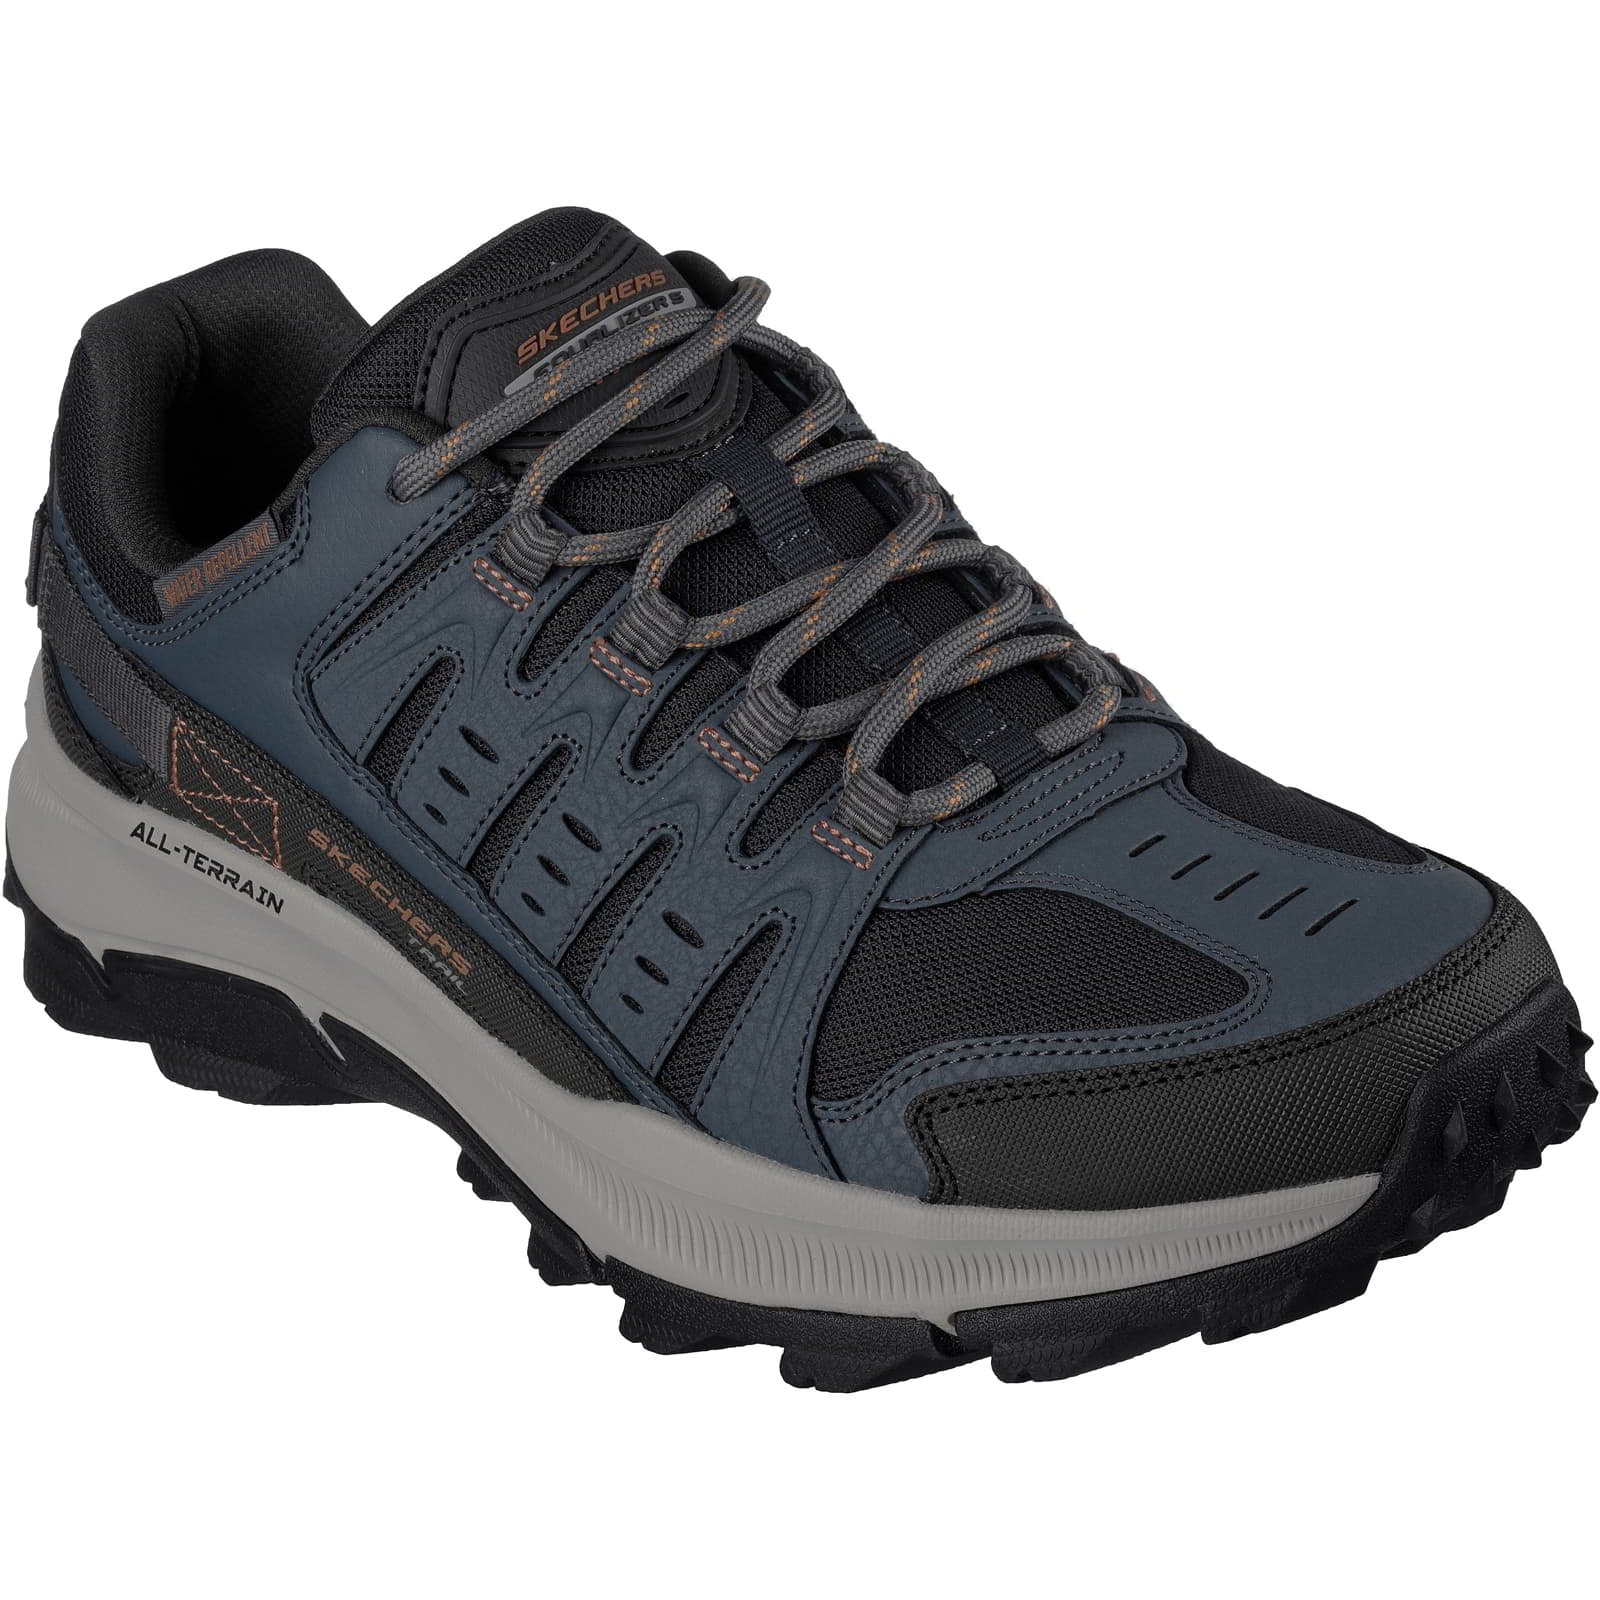 Skechers Men's Equalizer 5.0 Trail Water Repellent Walking Shoes Trainers - UK 8